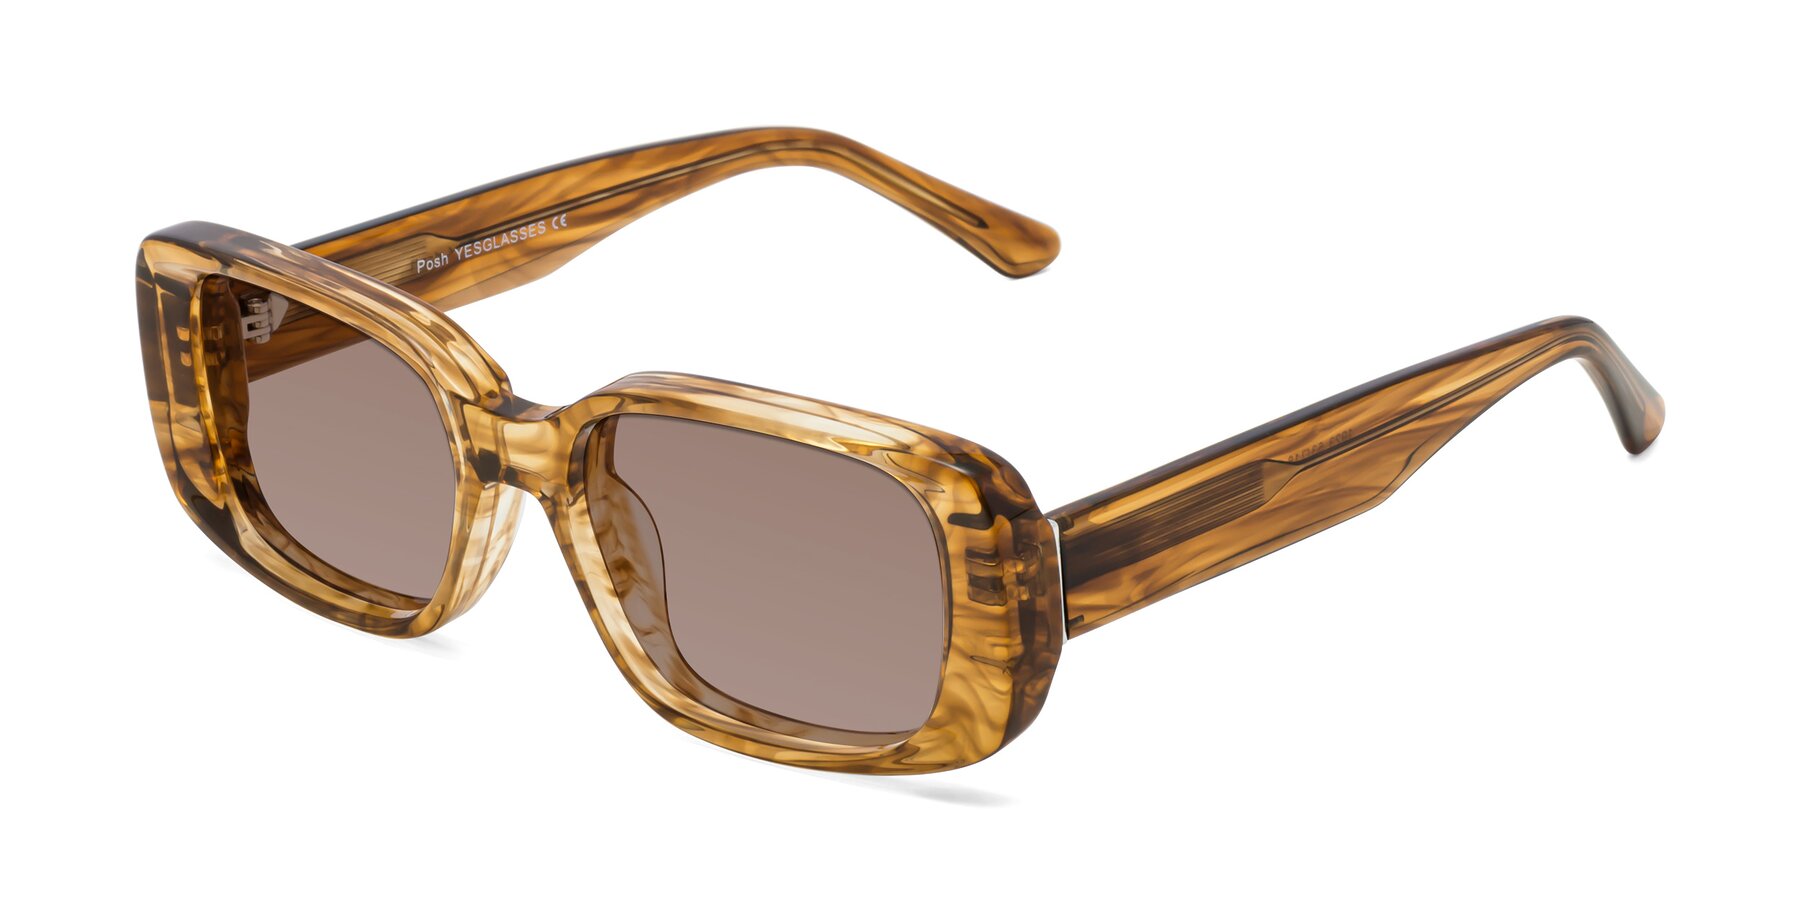 Angle of Posh in Stripe Amber with Medium Brown Tinted Lenses